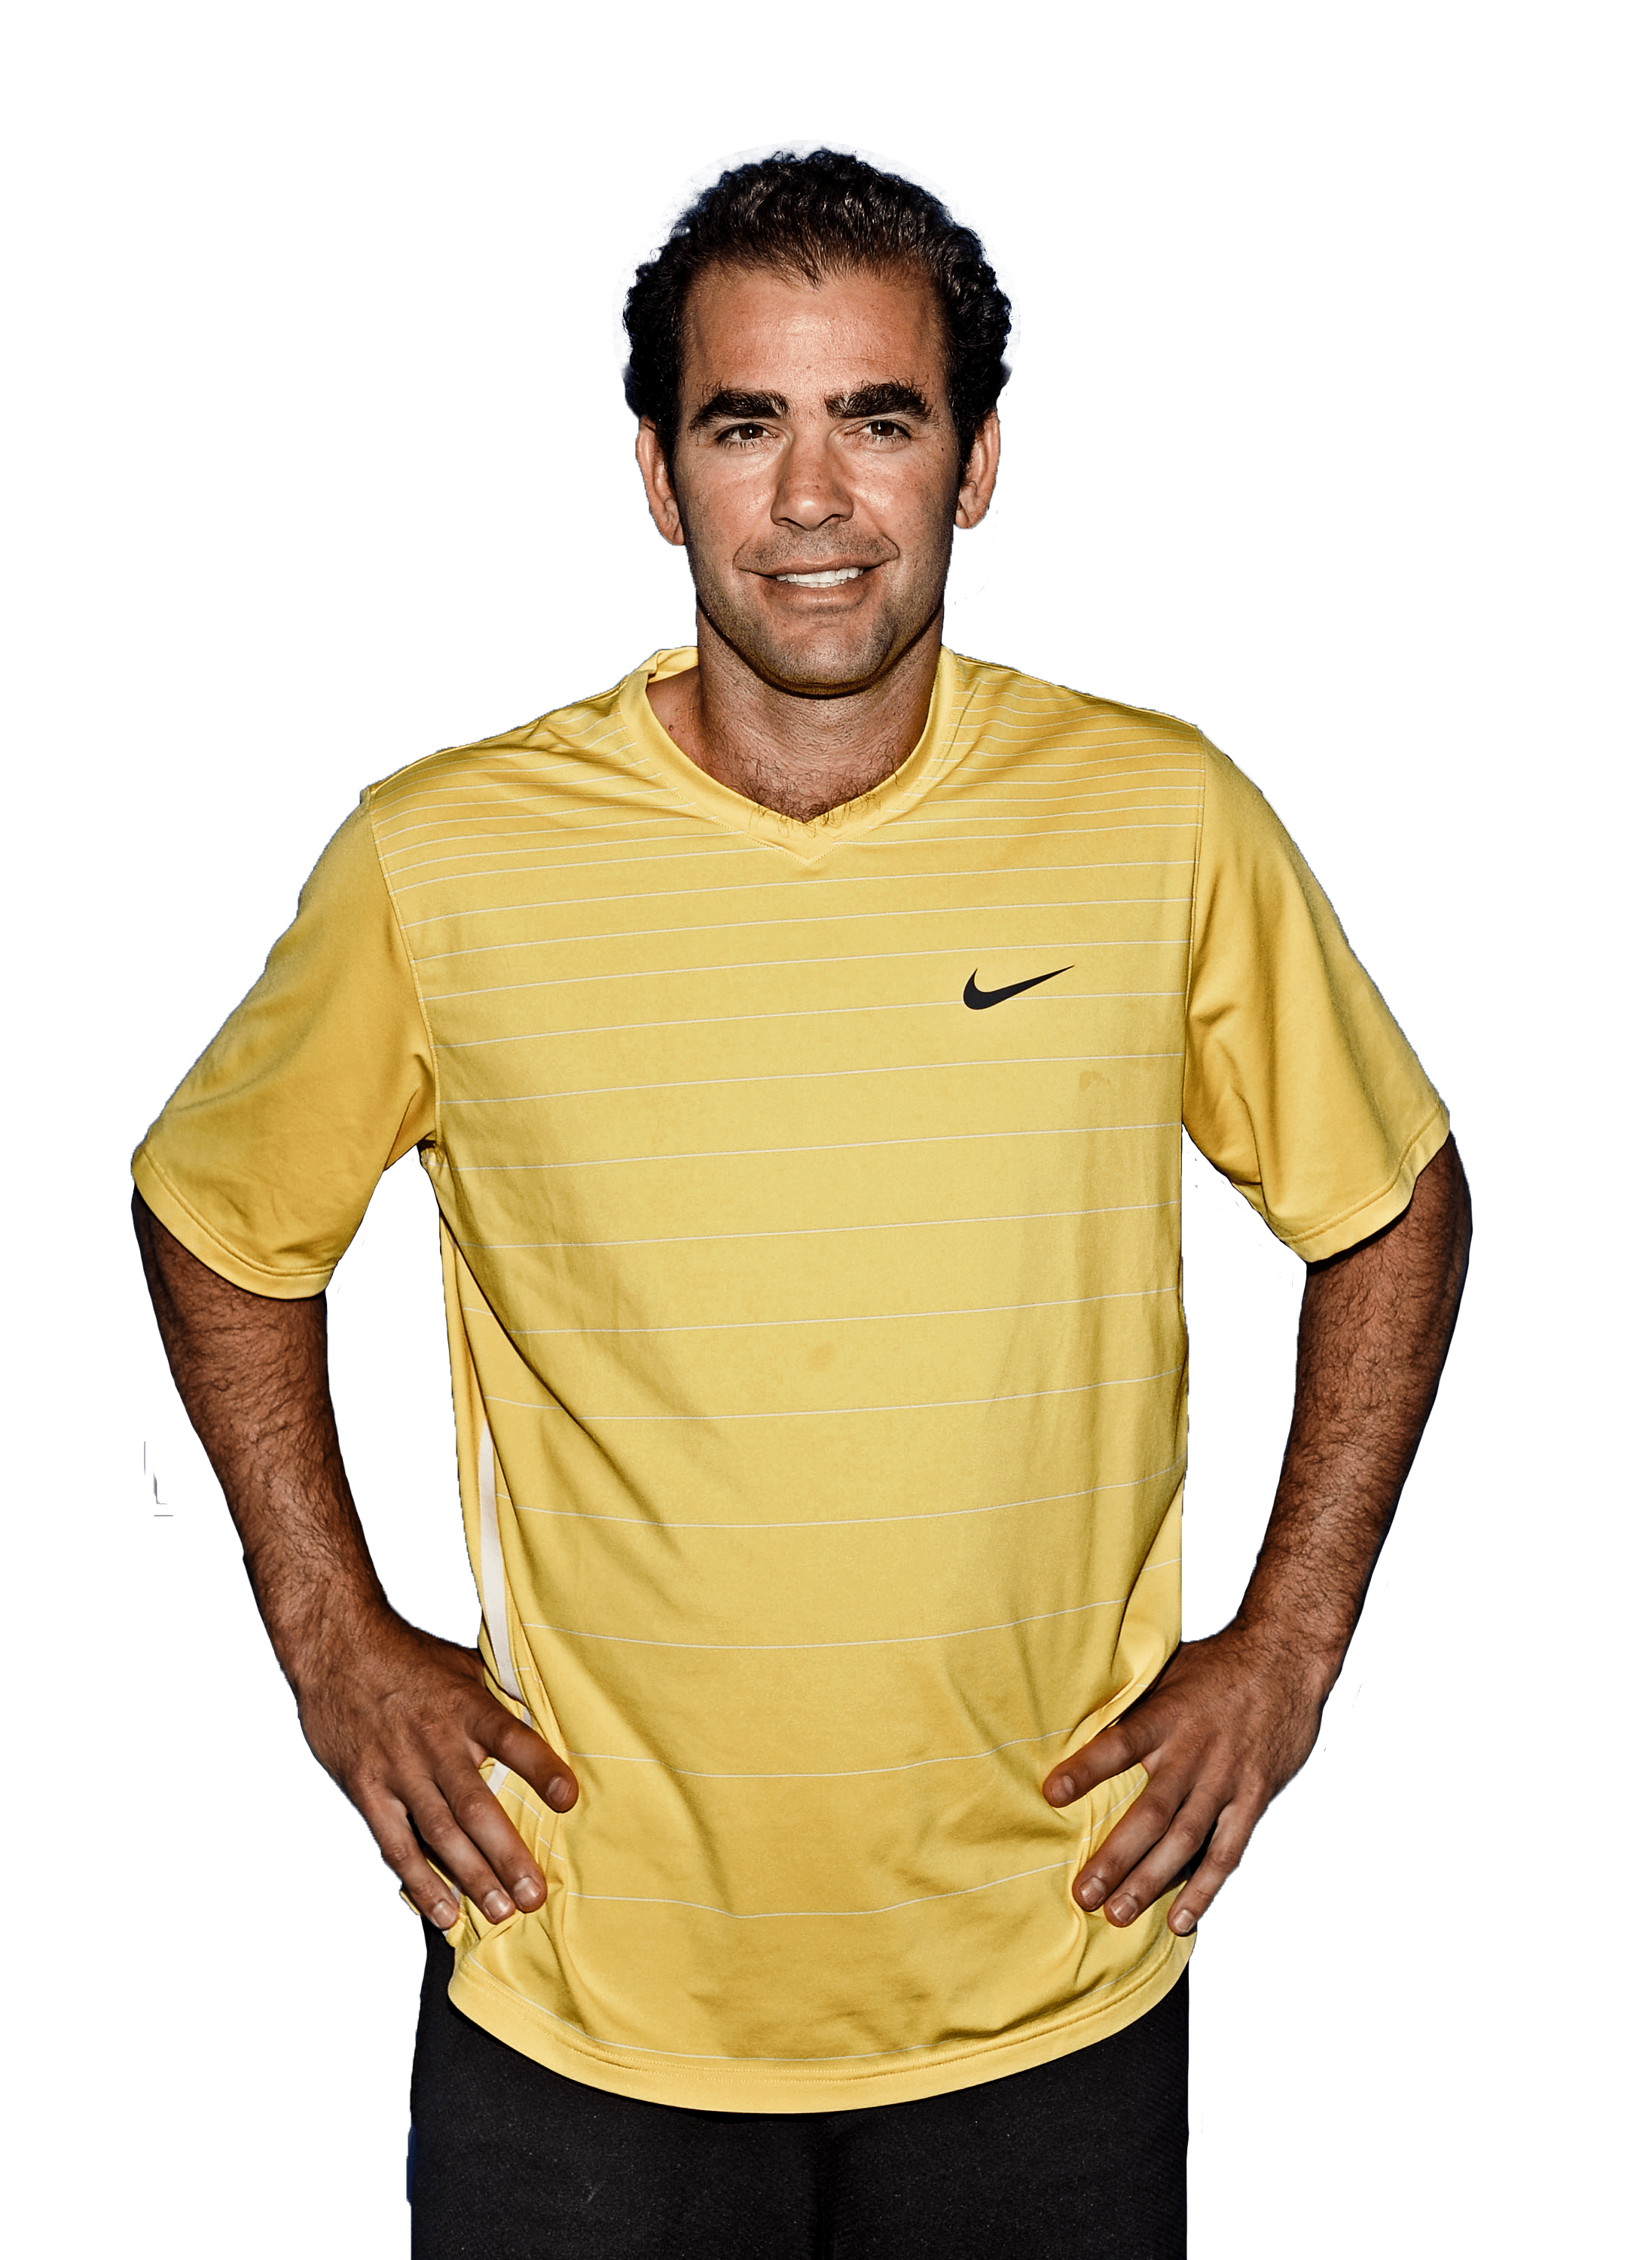 pete sampras and wife